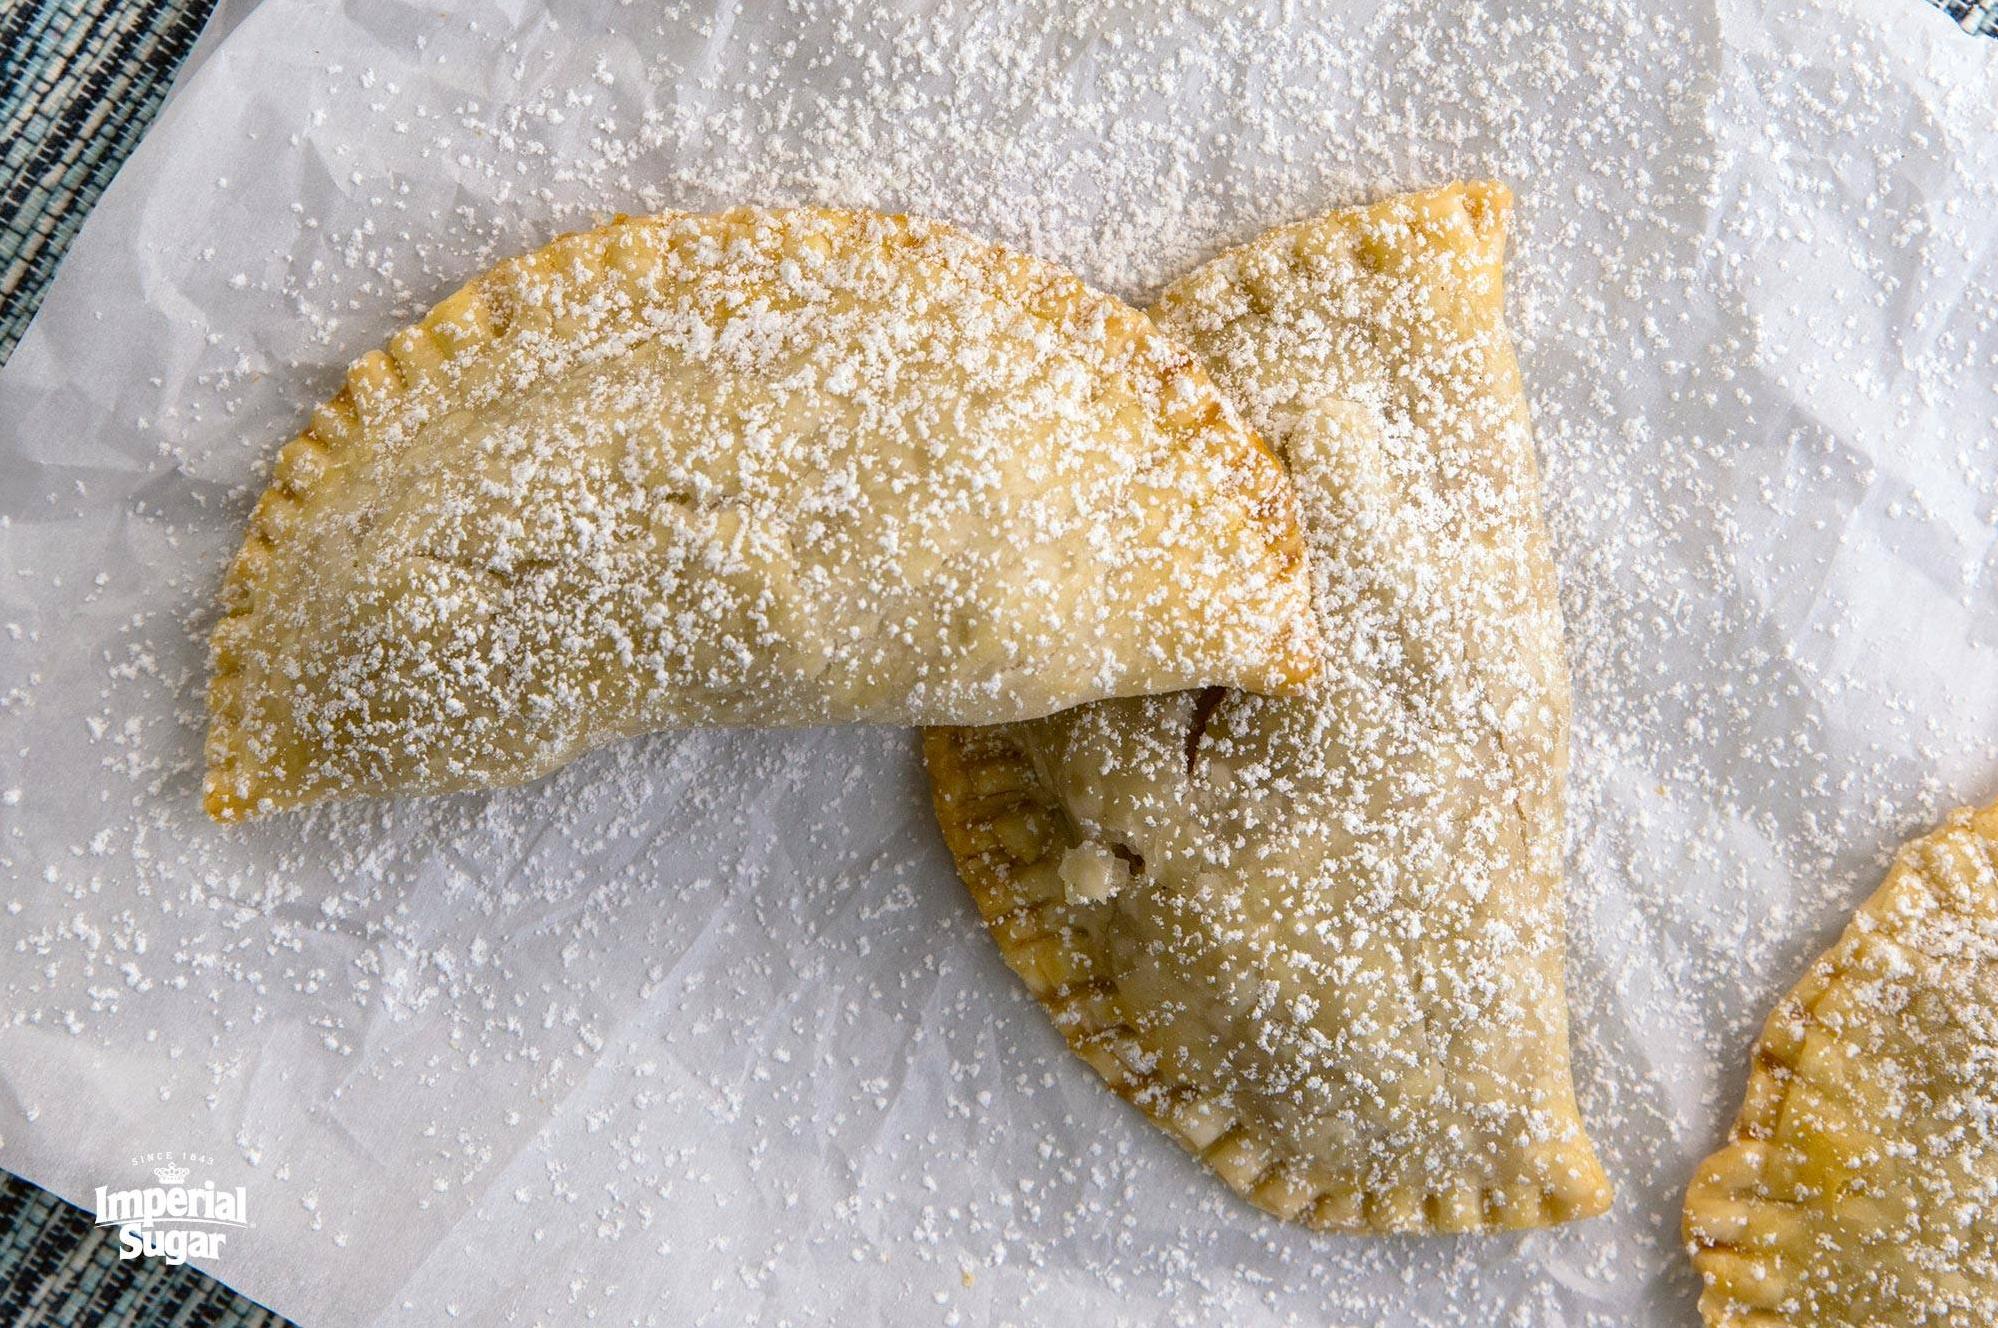  These empanadas are stuffed with sweet and creamy bananas for a delicious treat.